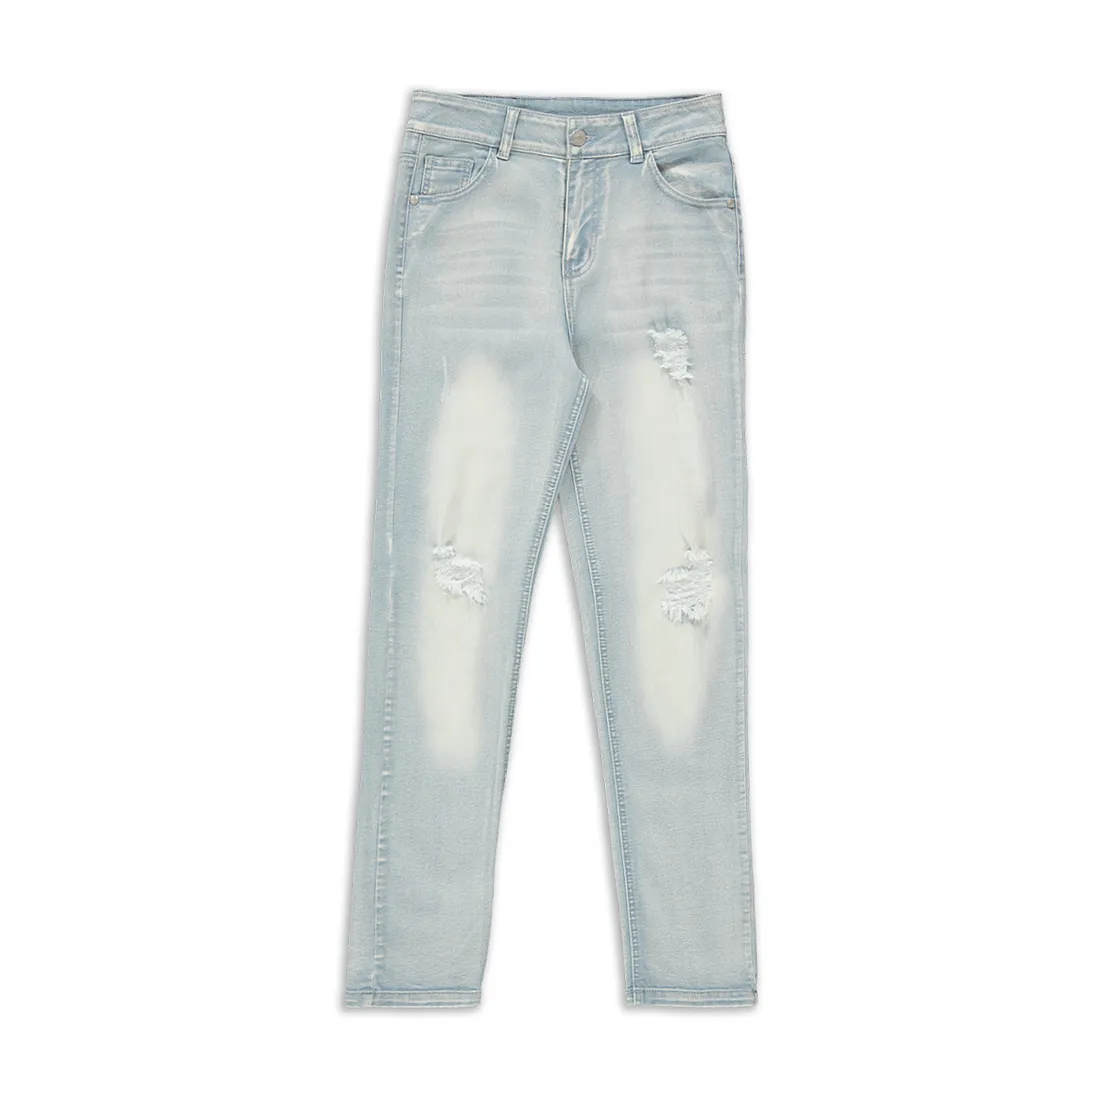 Ripped tapered denim jeans light blue - Boys 7-15 YEARS Bottoms & Jeans ...